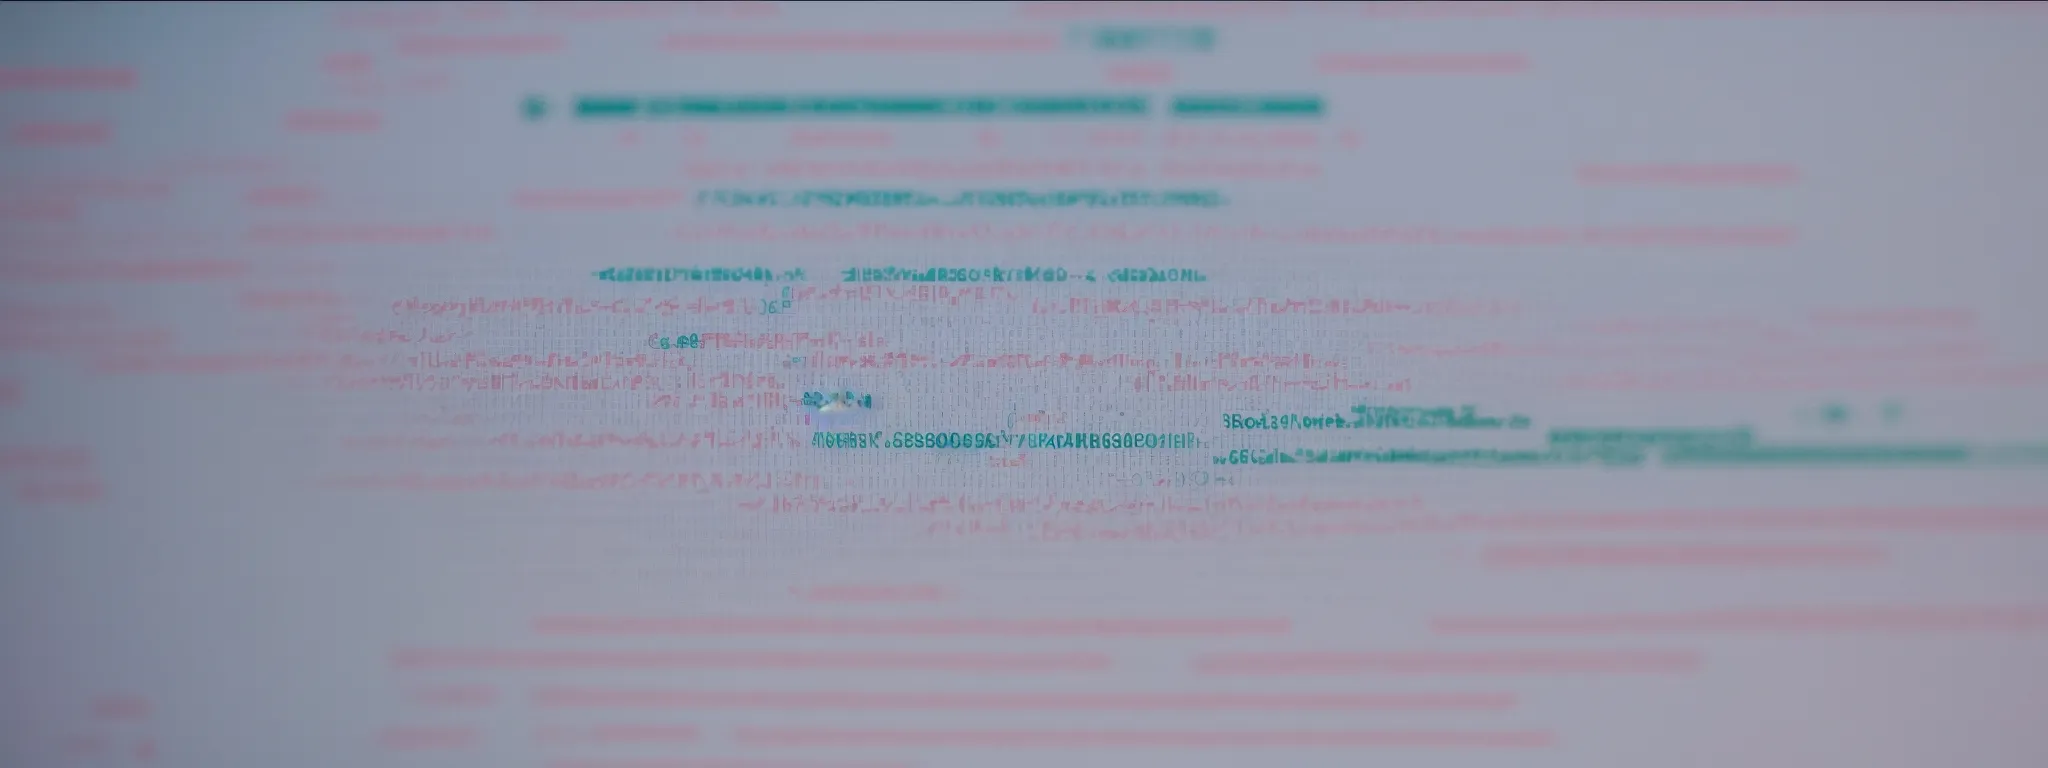 a close-up of a computer screen displaying a neatly organized html code with clear, descriptive and consistent title tags visible.